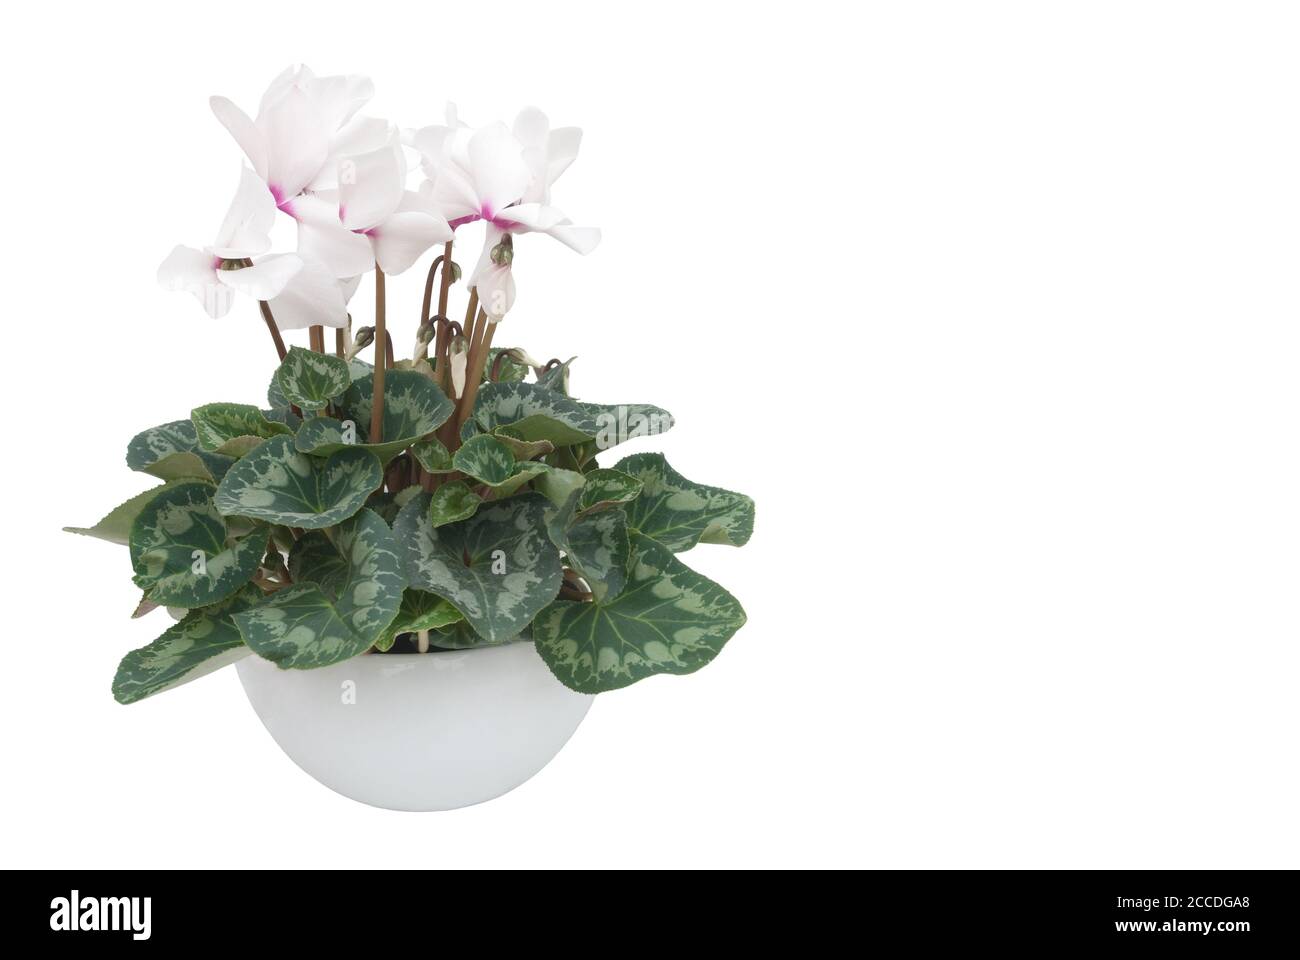 Cyclamen in a flower pot against a white background Stock Photo